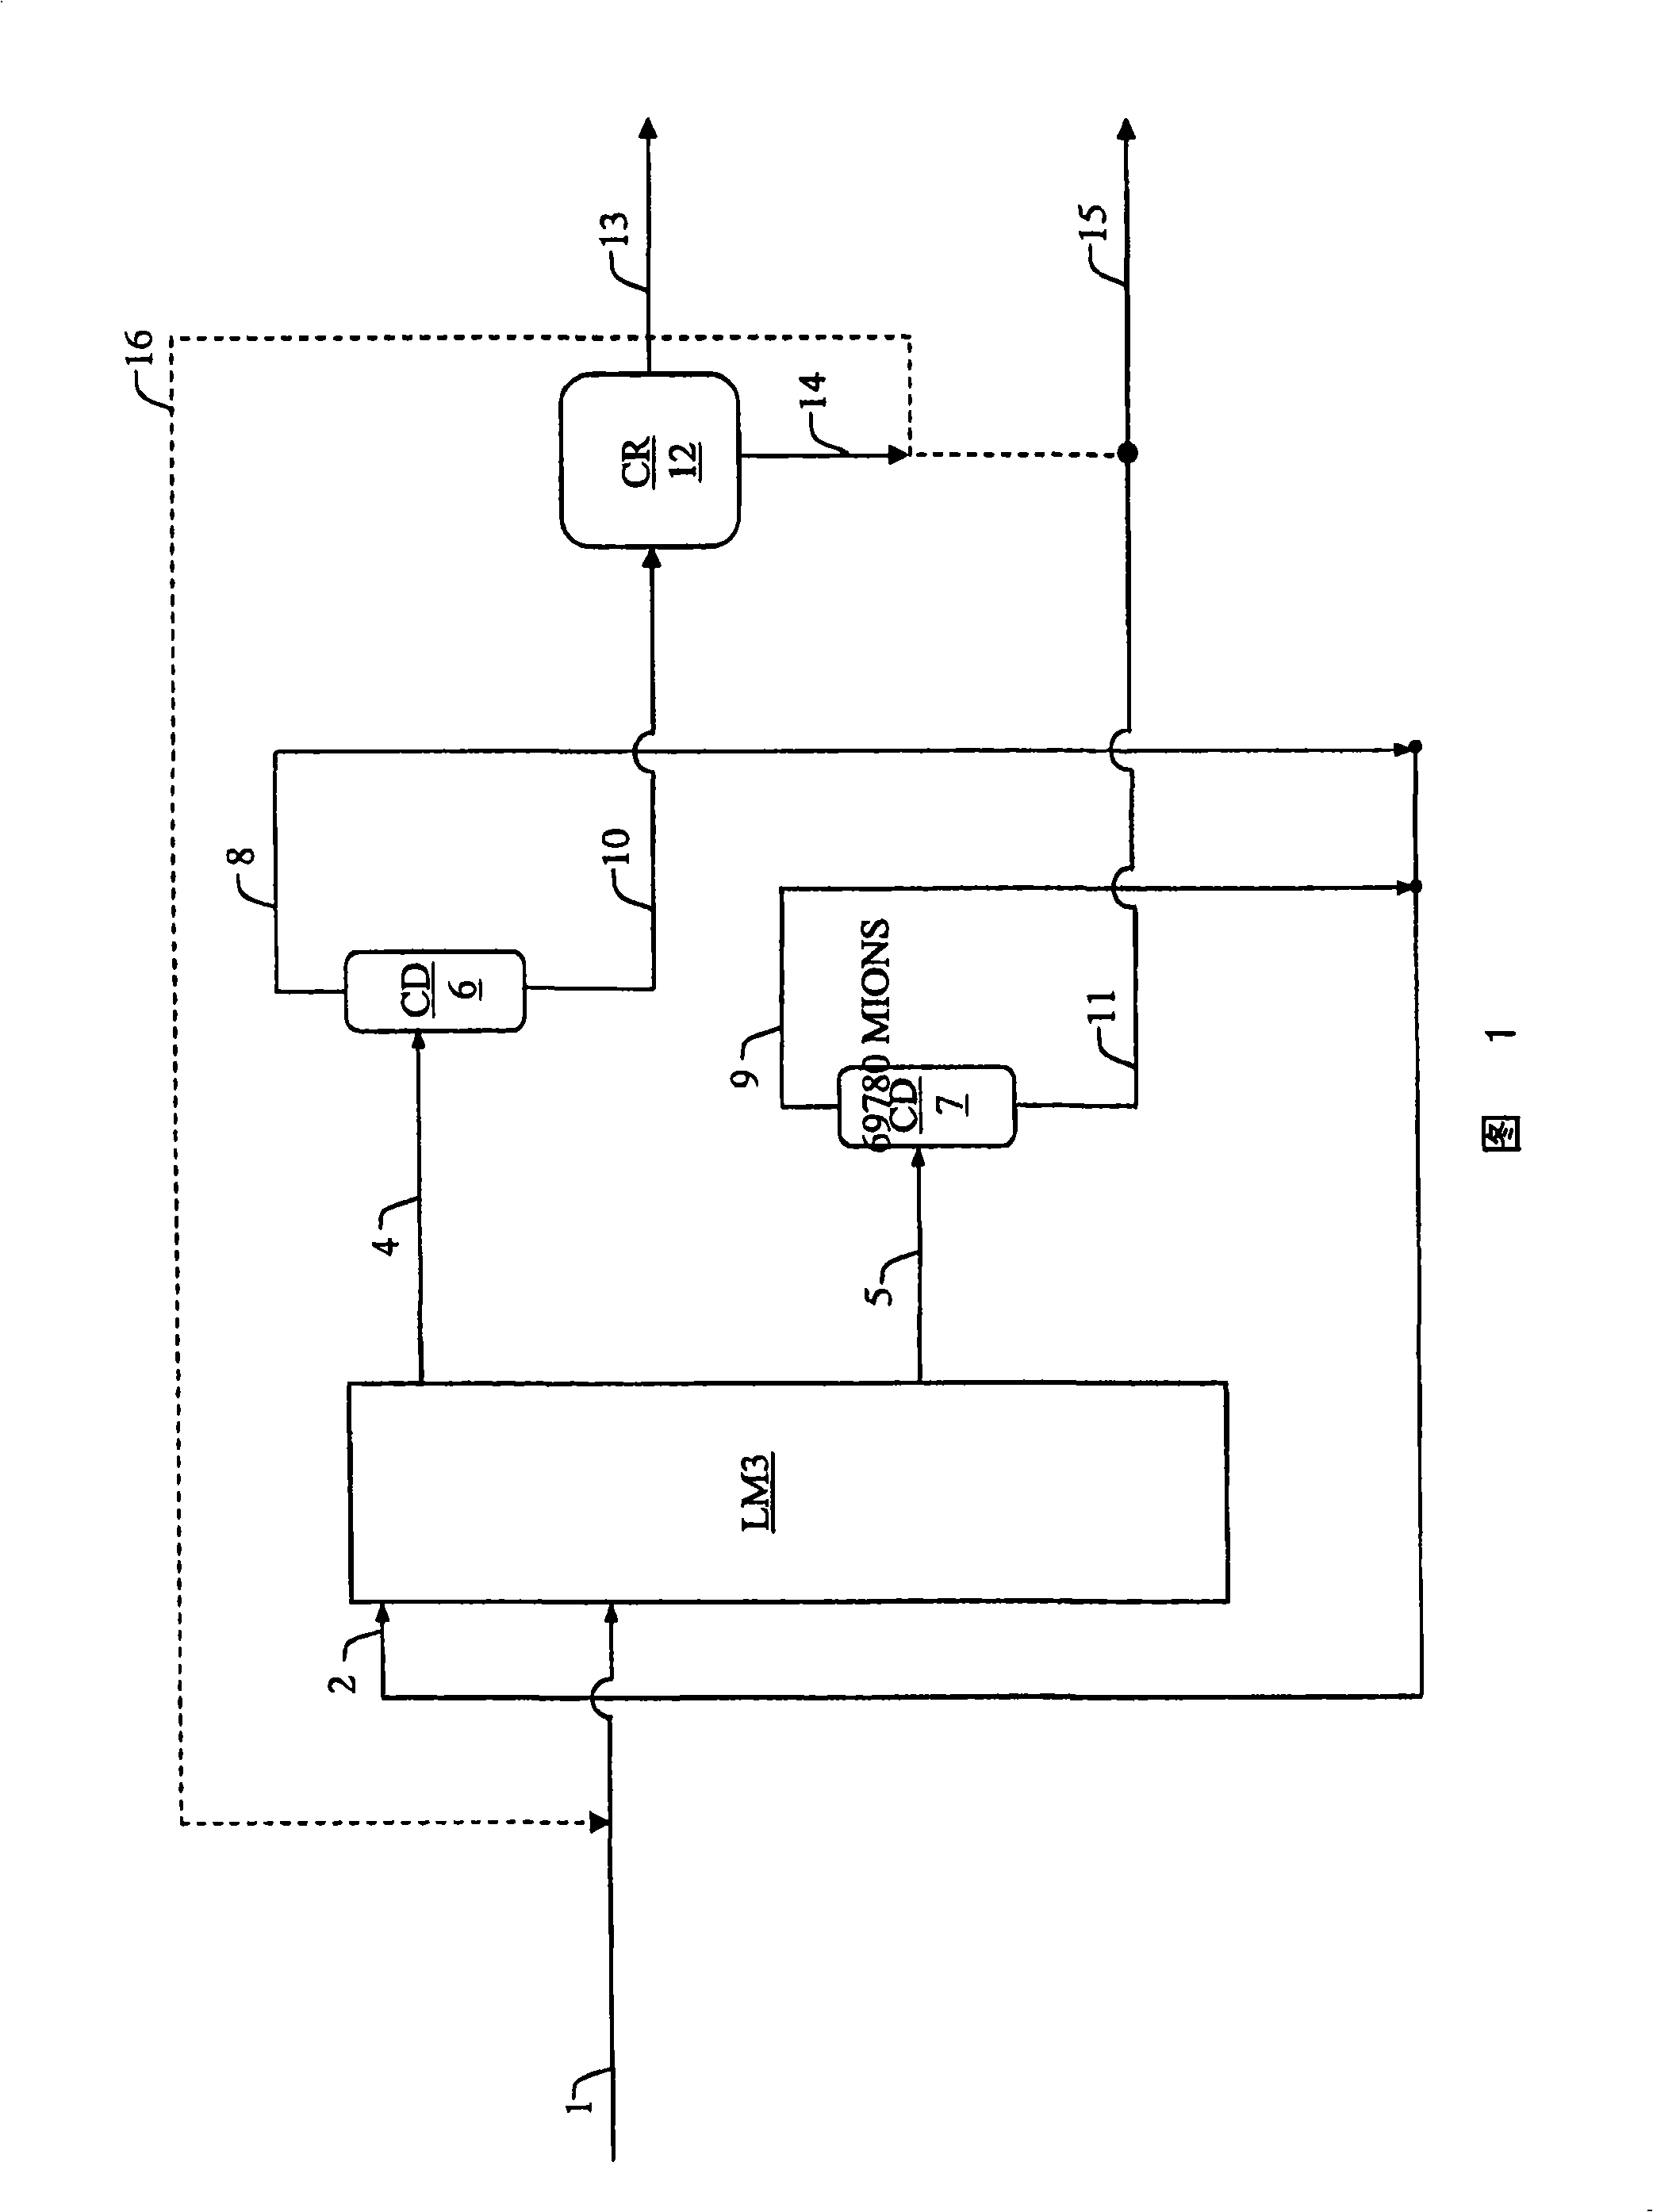 Process for producing high purity meta-xylene, comprising simulated moving bed adsorption and crystallization